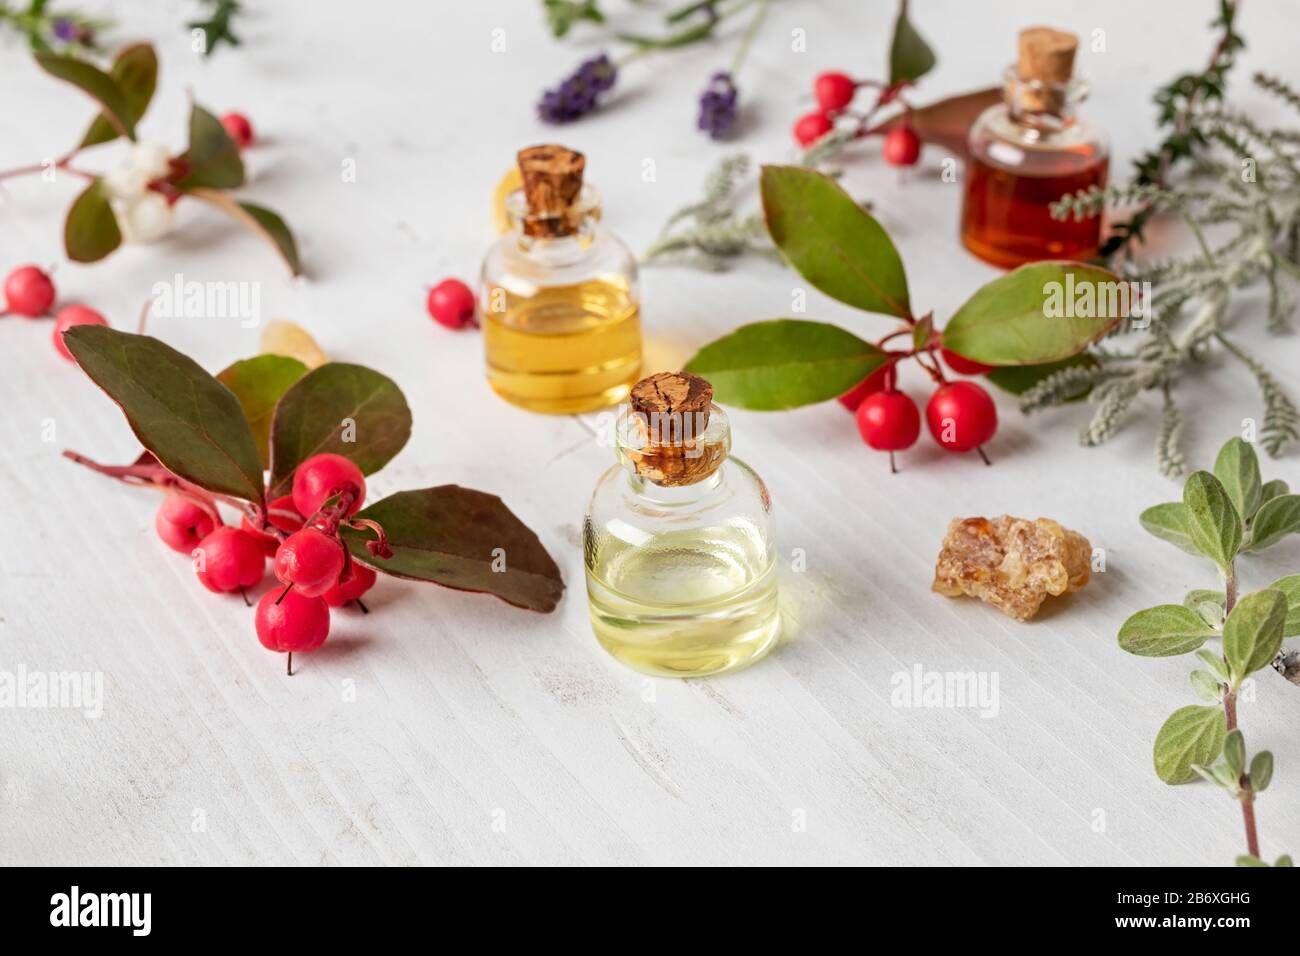 Bottles of essential oil with frankincense, wintergreen, santolina and other herbs on white background Stock Photo